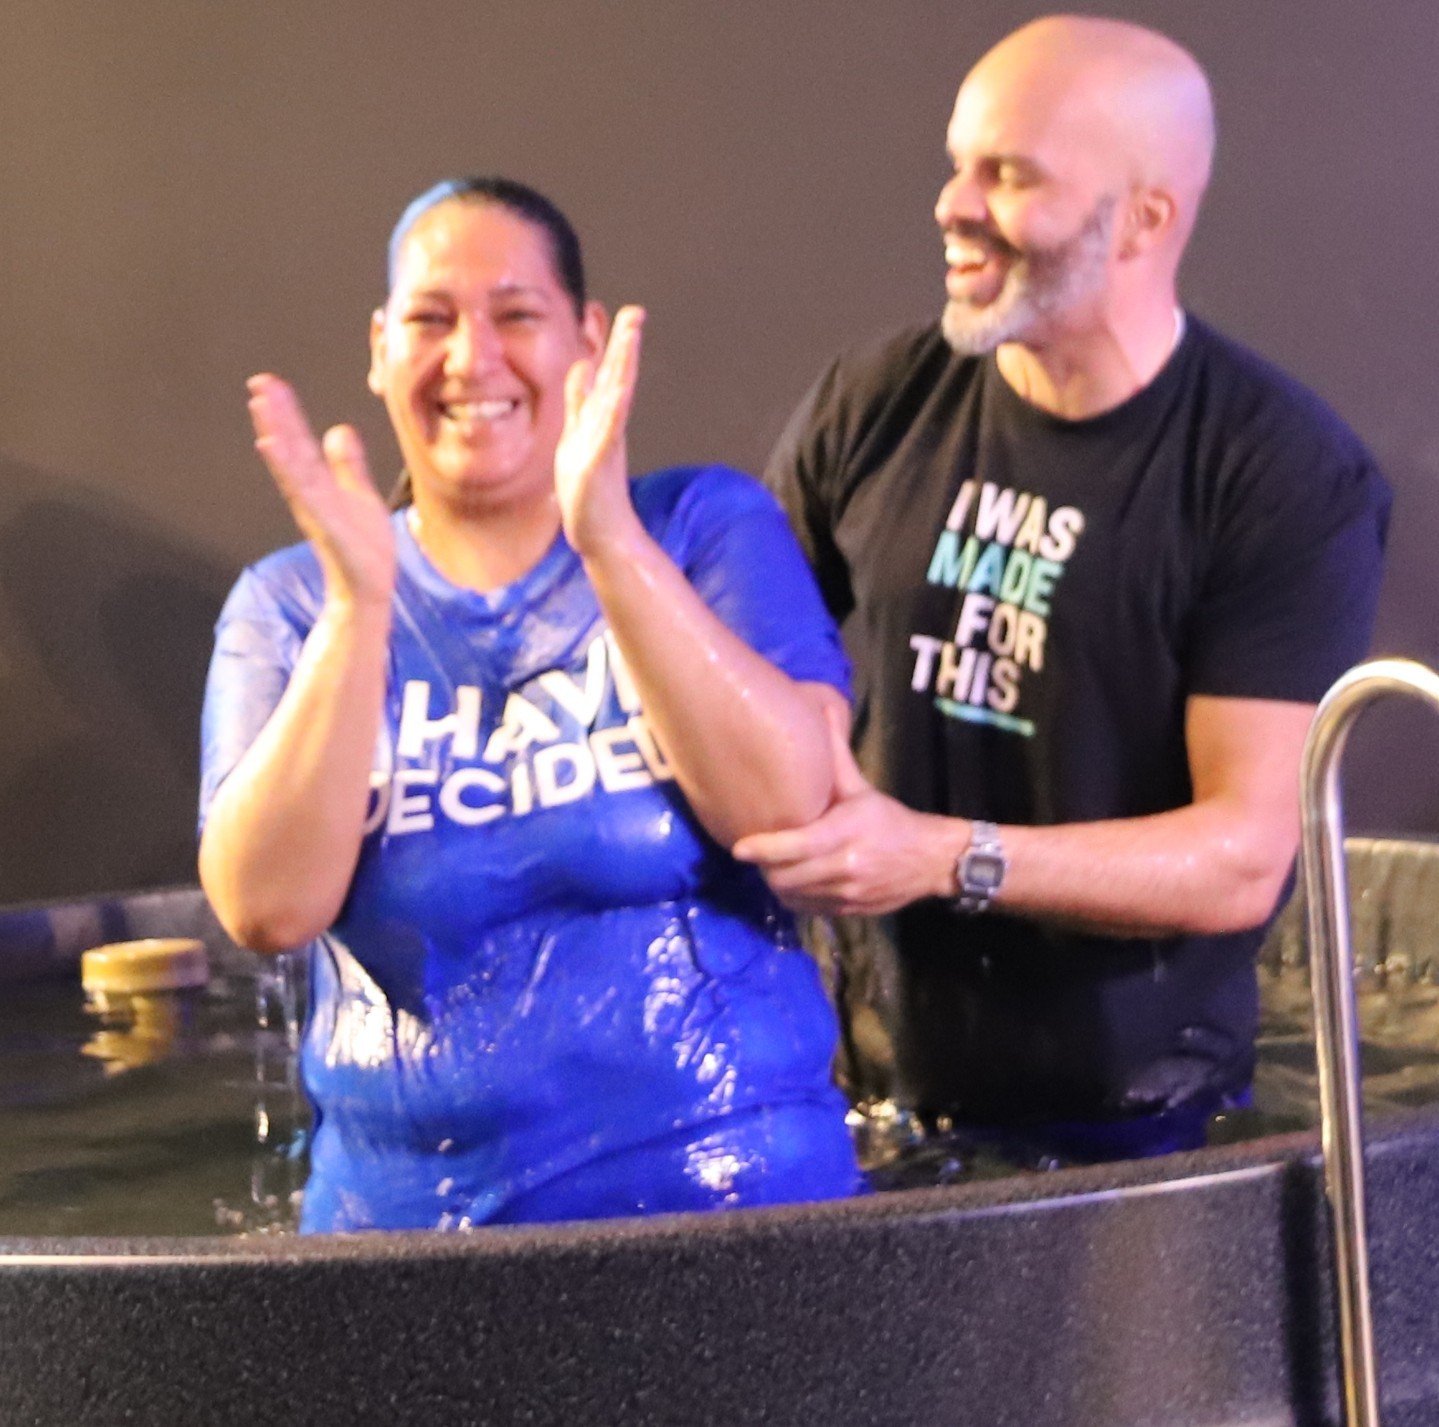 Baptism Sunday are our fave! It's a celebration like none other and we are so grateful to be a witness to others commitment to Christ. 

Our next water baptism is Sunday, May 5th. Sign up now: https://www.newlifebronx.com/differentchurch